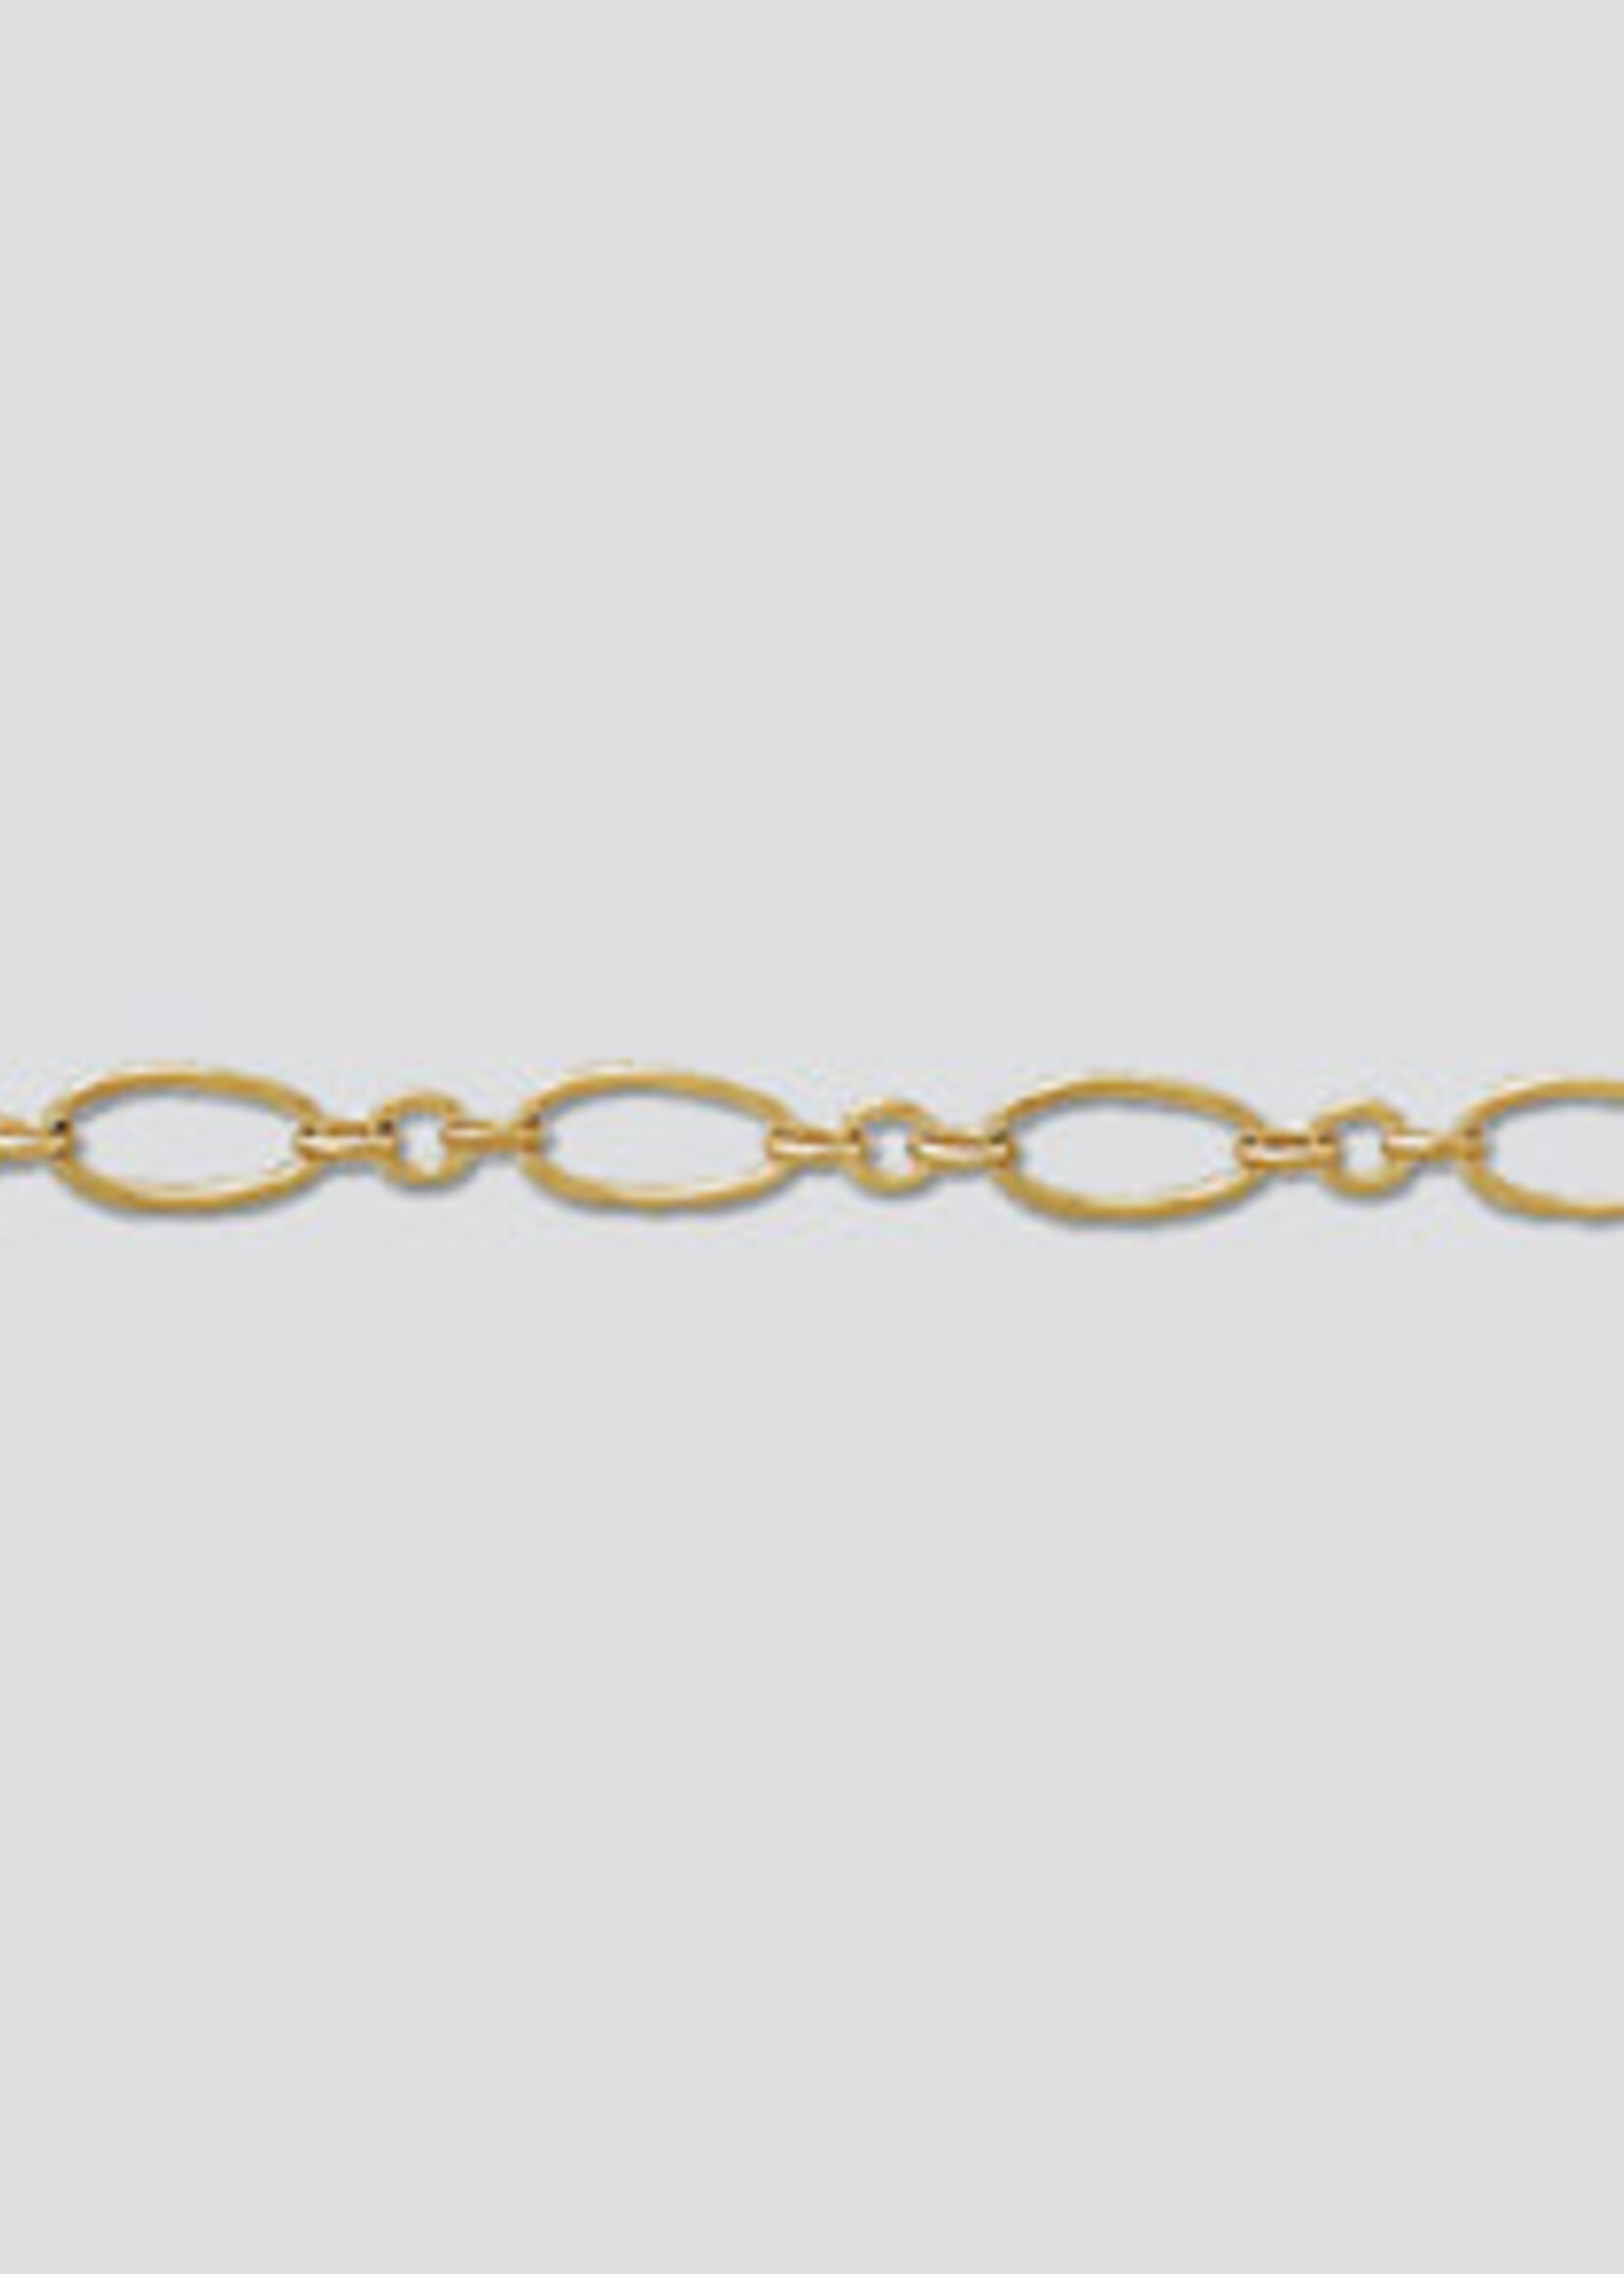 Oval Long & Short Chain 14k Gold Filled Inch